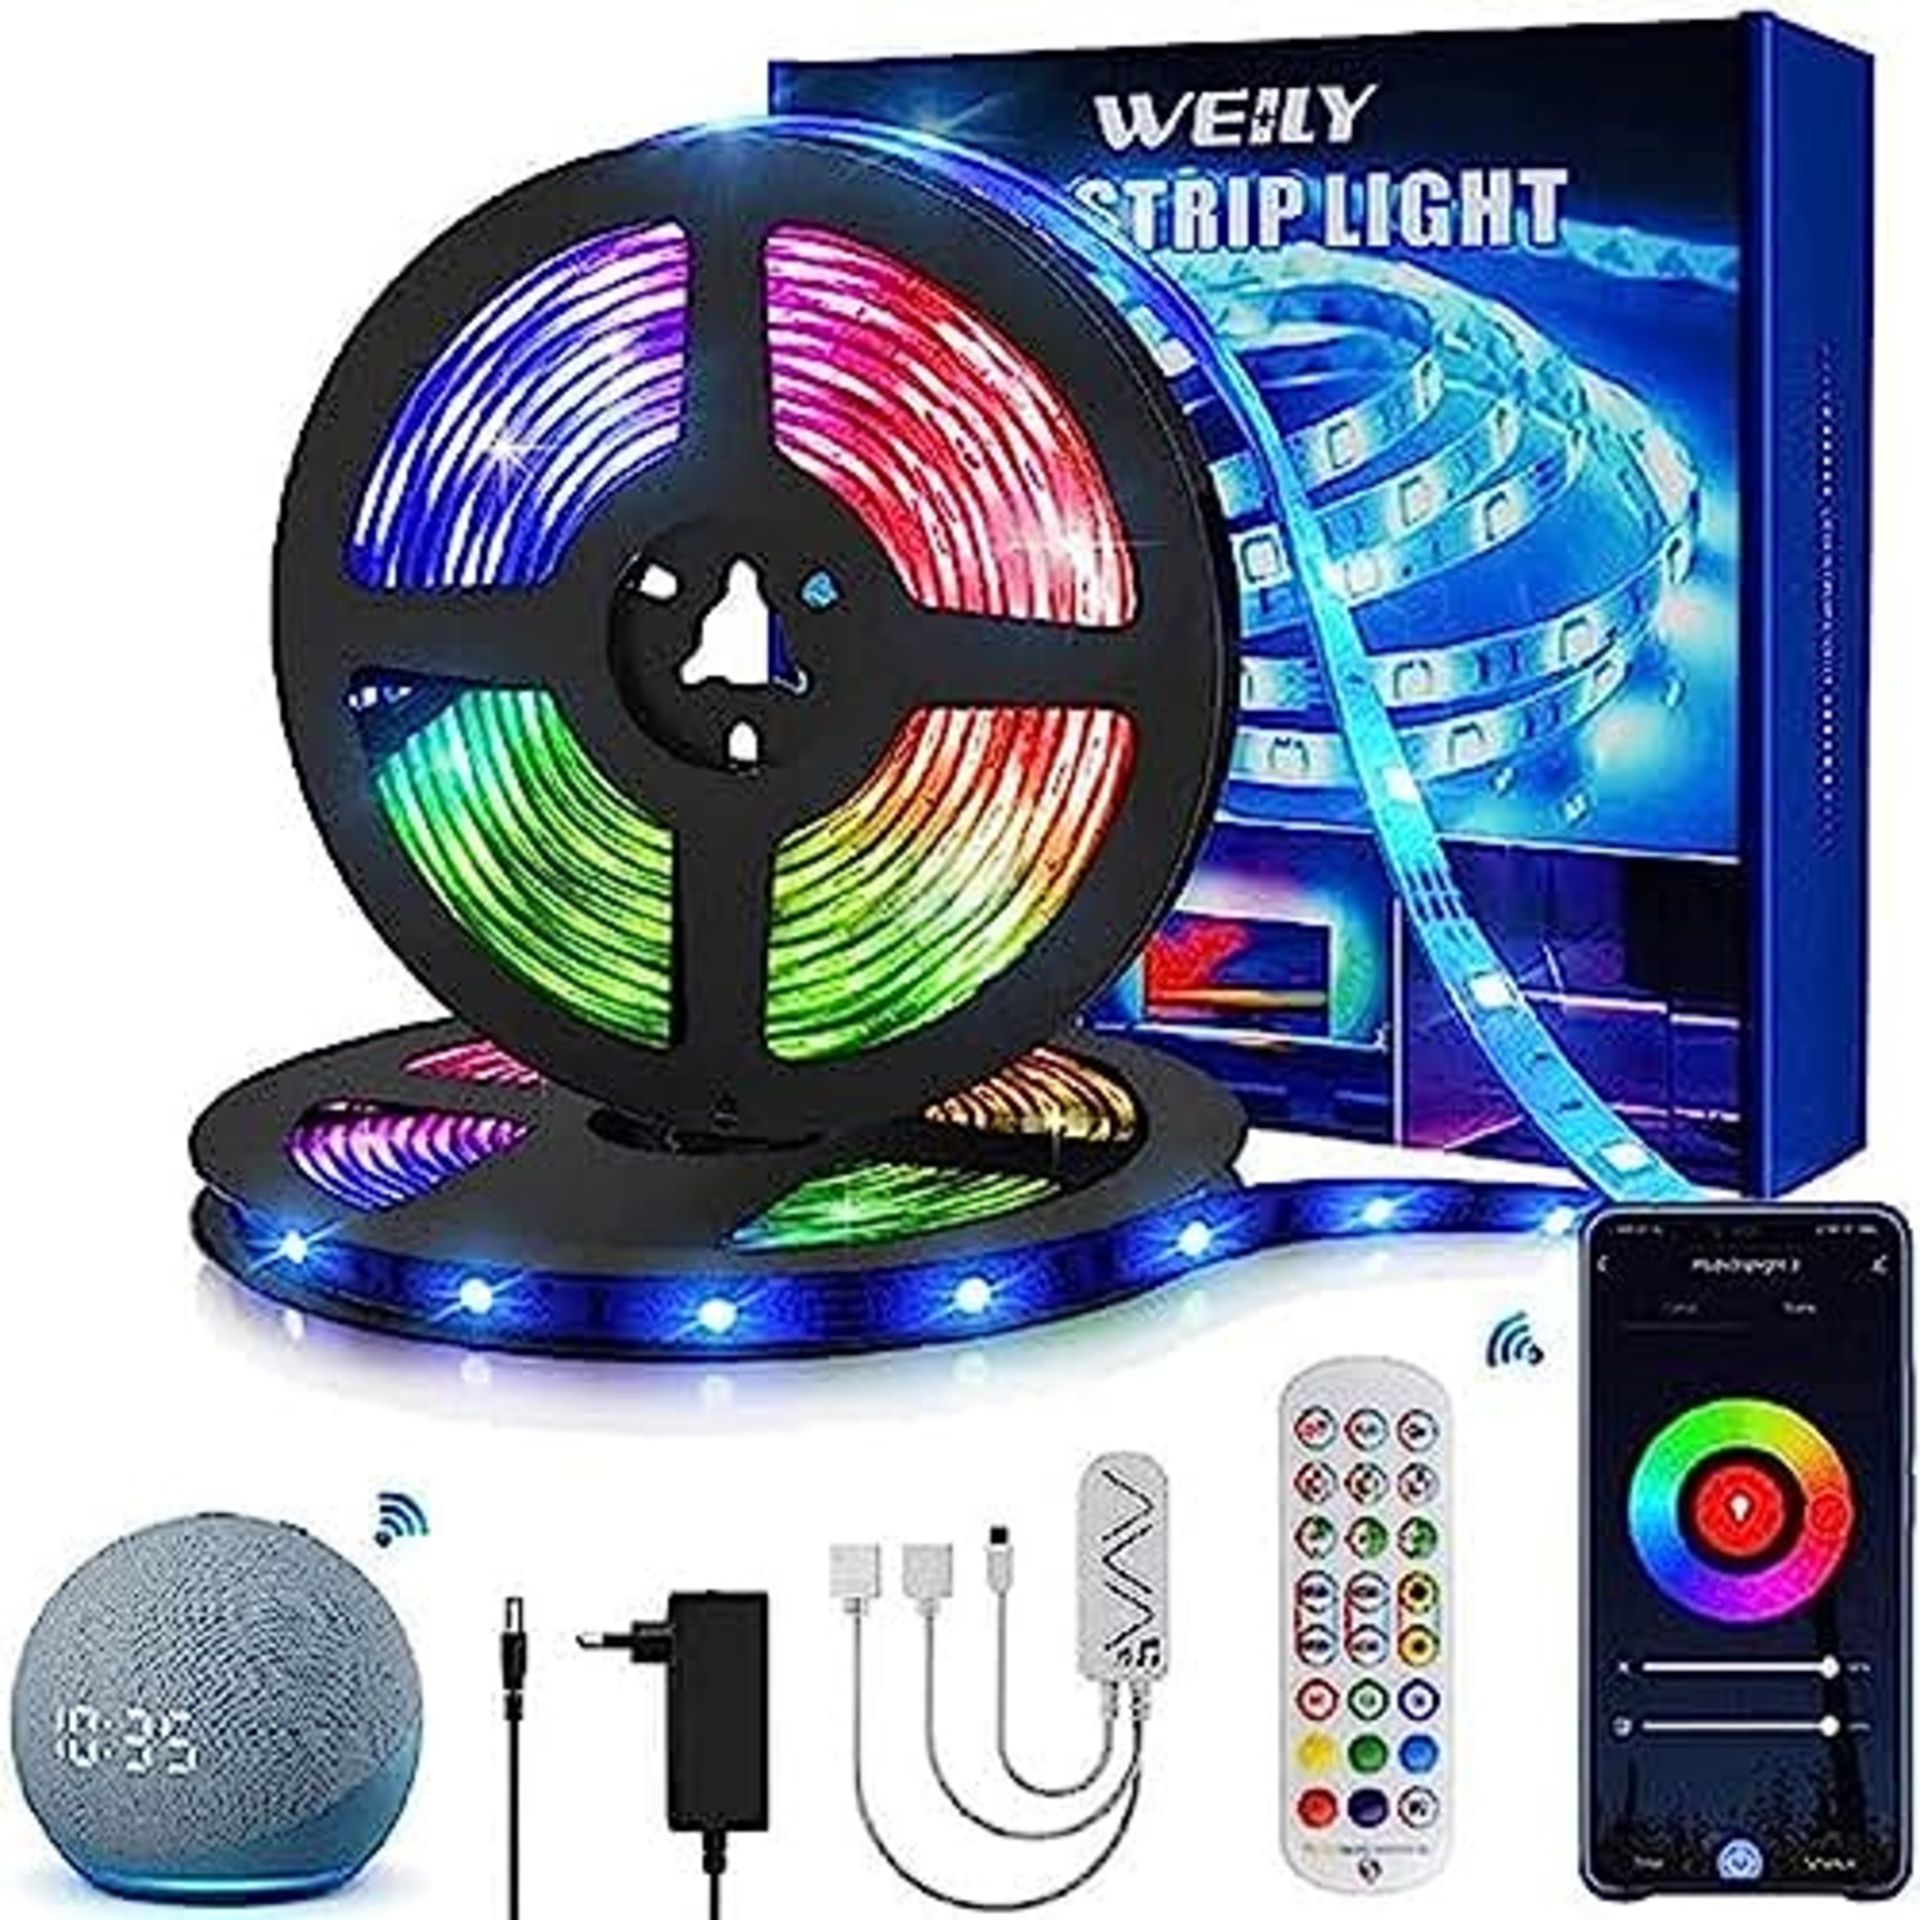 15M LED Strips, WEILY 15M RGB Colorful LED Room Lights Remote Control Music LED Strips